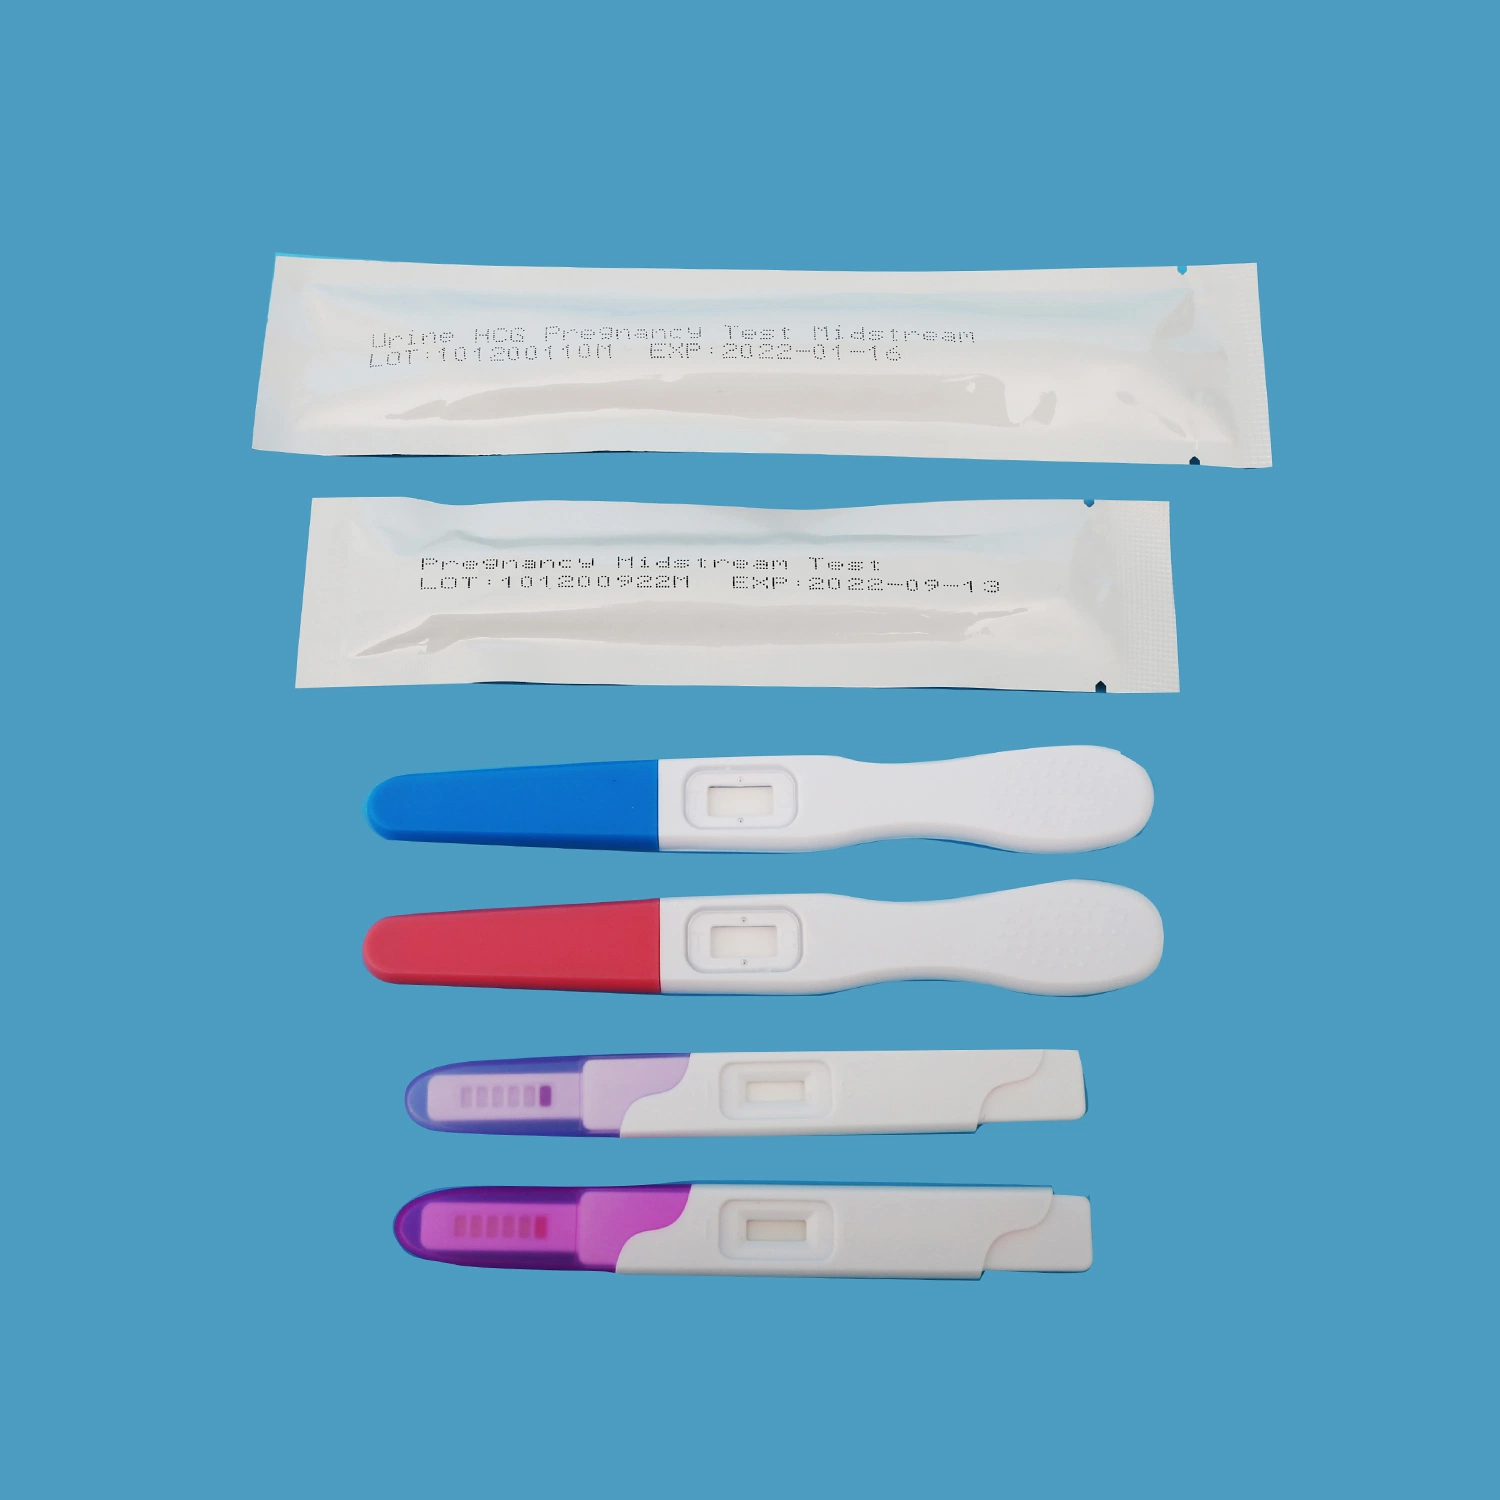 CE Marked Other Household Medical Devices Urine HCG Pregnancy Test Kits Strip